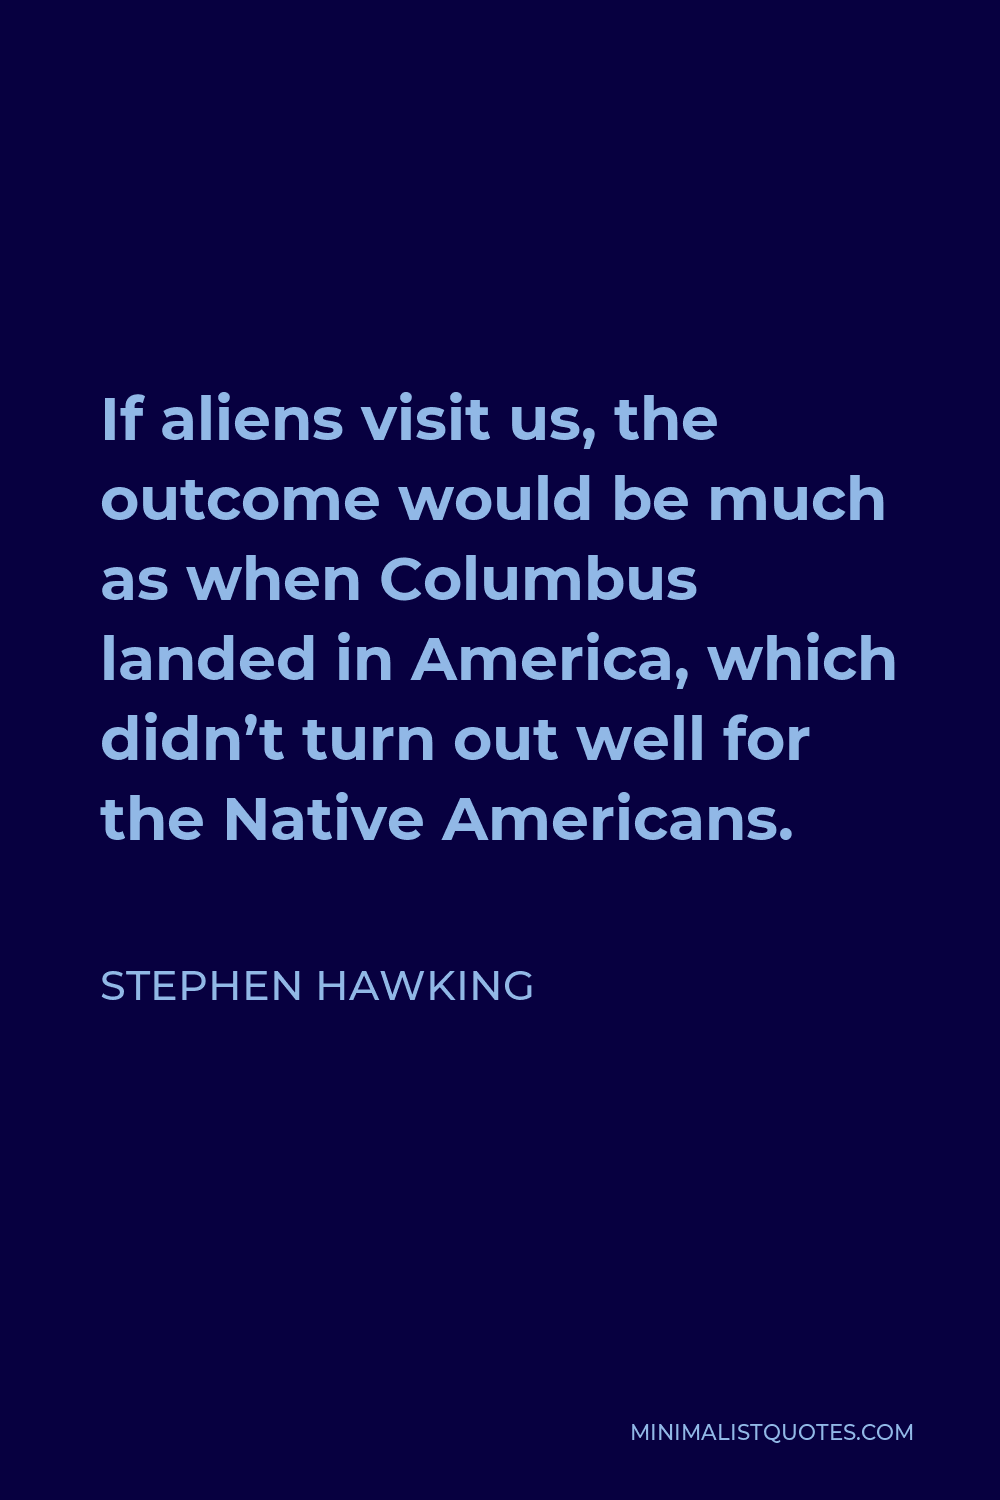 Stephen Hawking Quote - If aliens visit us, the outcome would be much as when Columbus landed in America, which didn’t turn out well for the Native Americans.